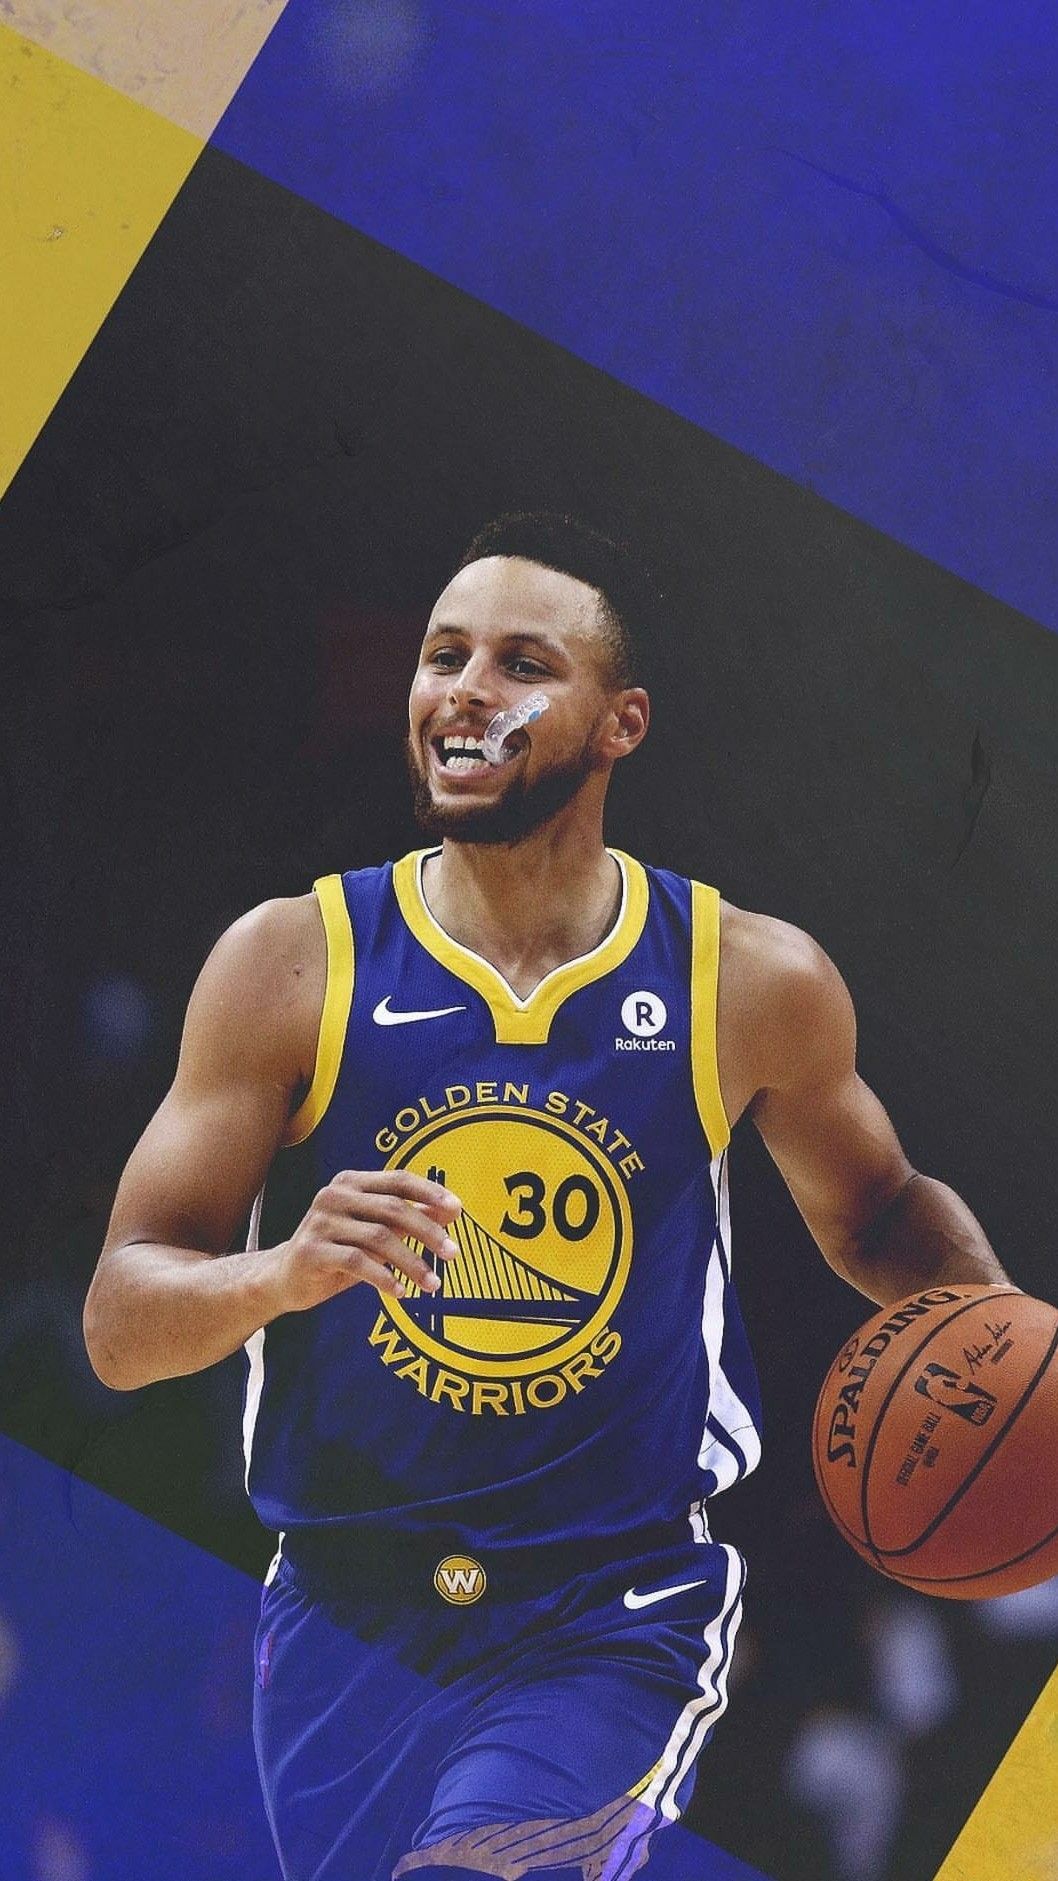 Dunking at the all star game stephen curry golden state warriors wallpaper  with lebron james  Stephen curry wallpaper Nba stephen curry Stephen  curry